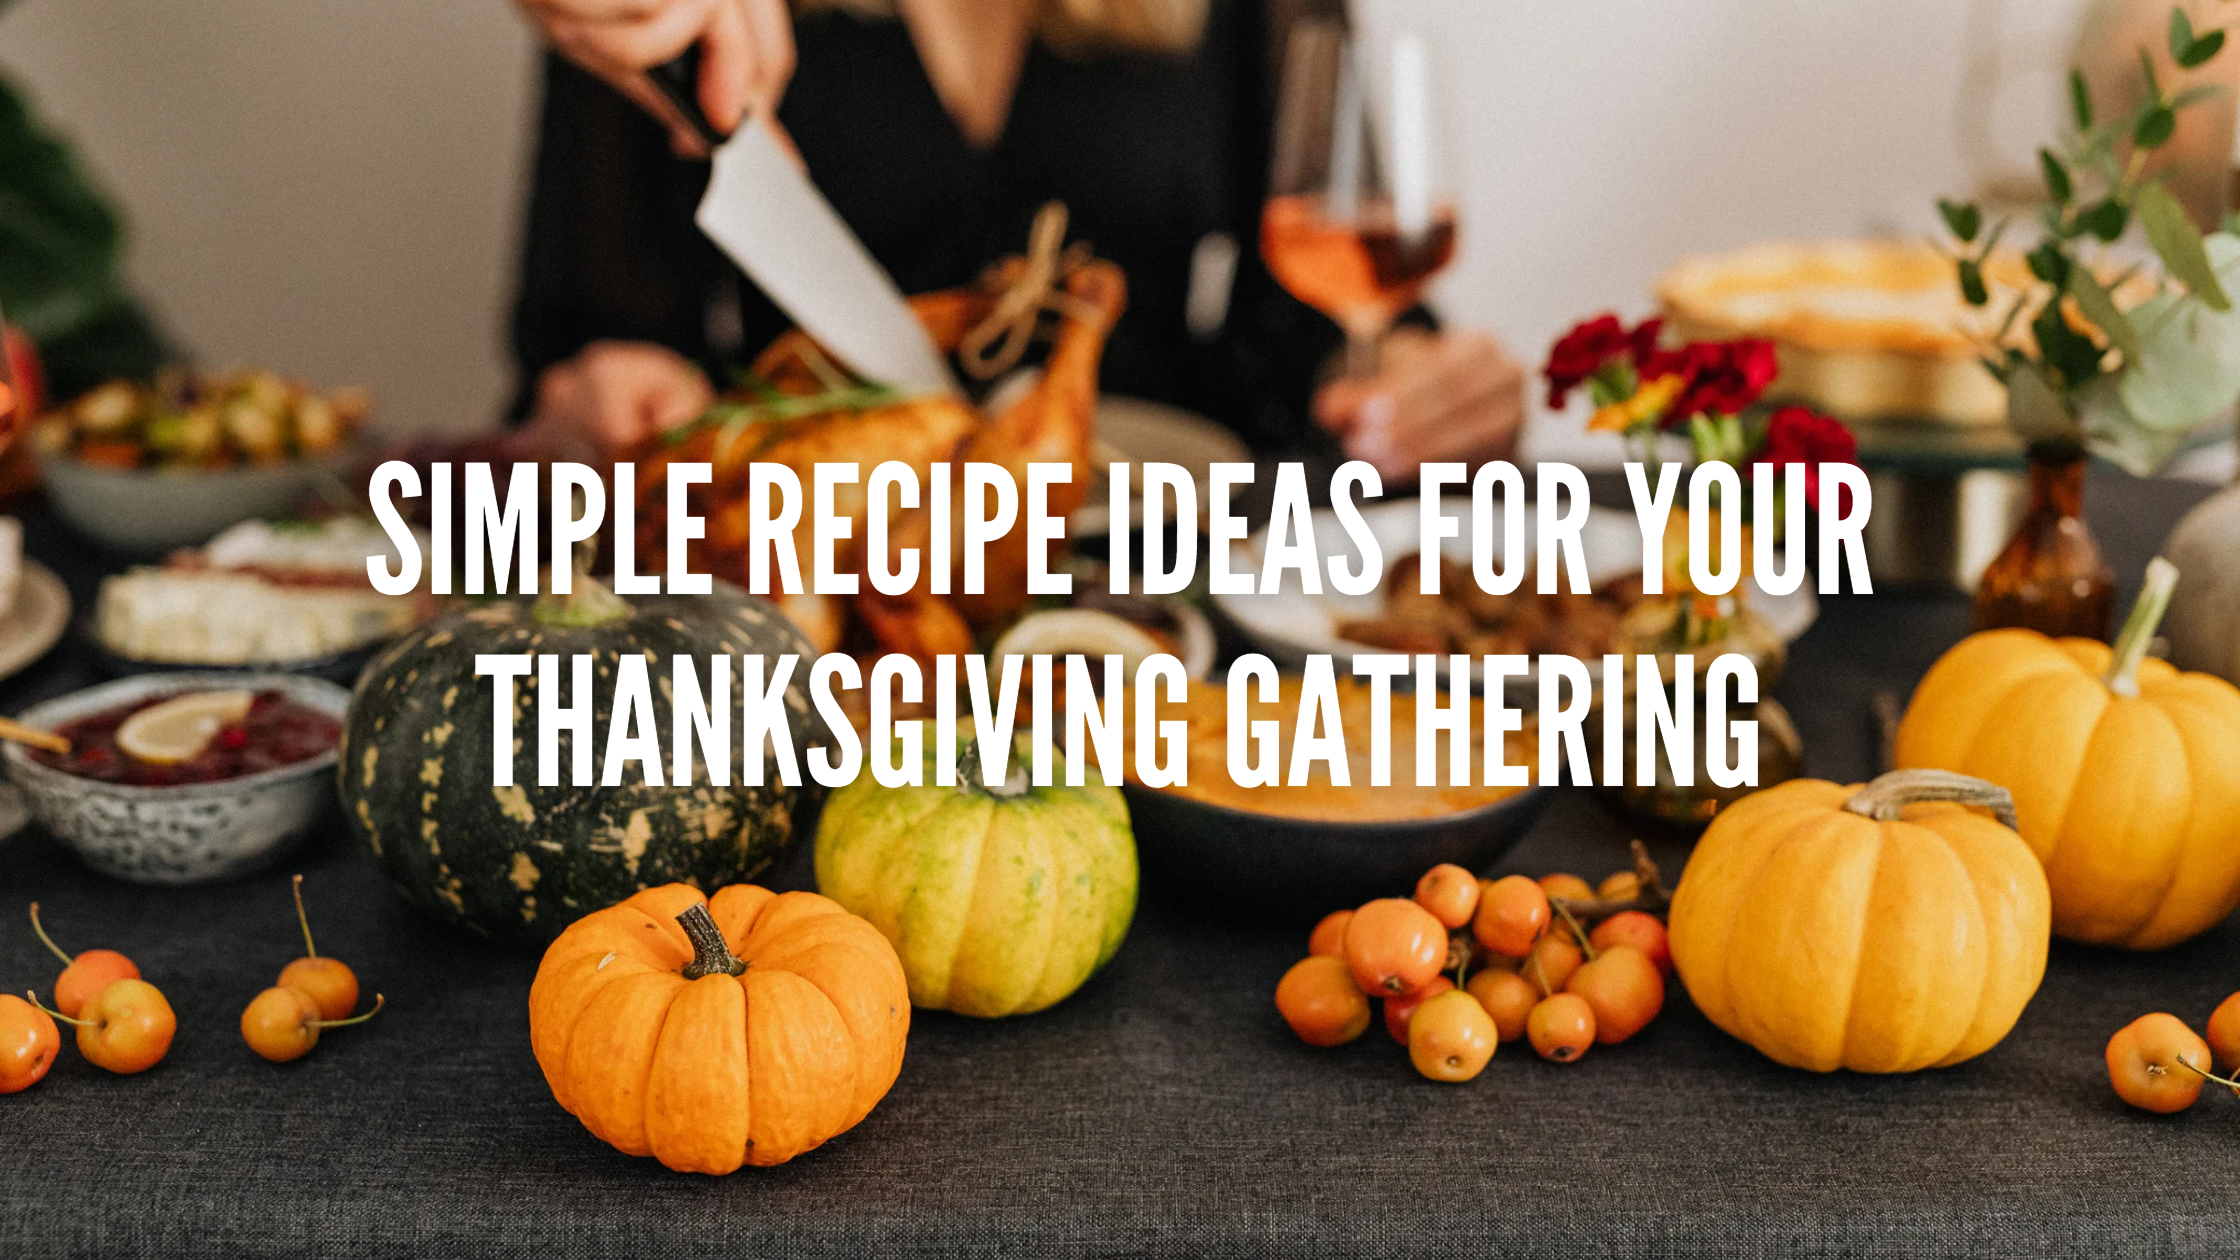 Simple Recipe Ideas for Your Thanksgiving Gathering